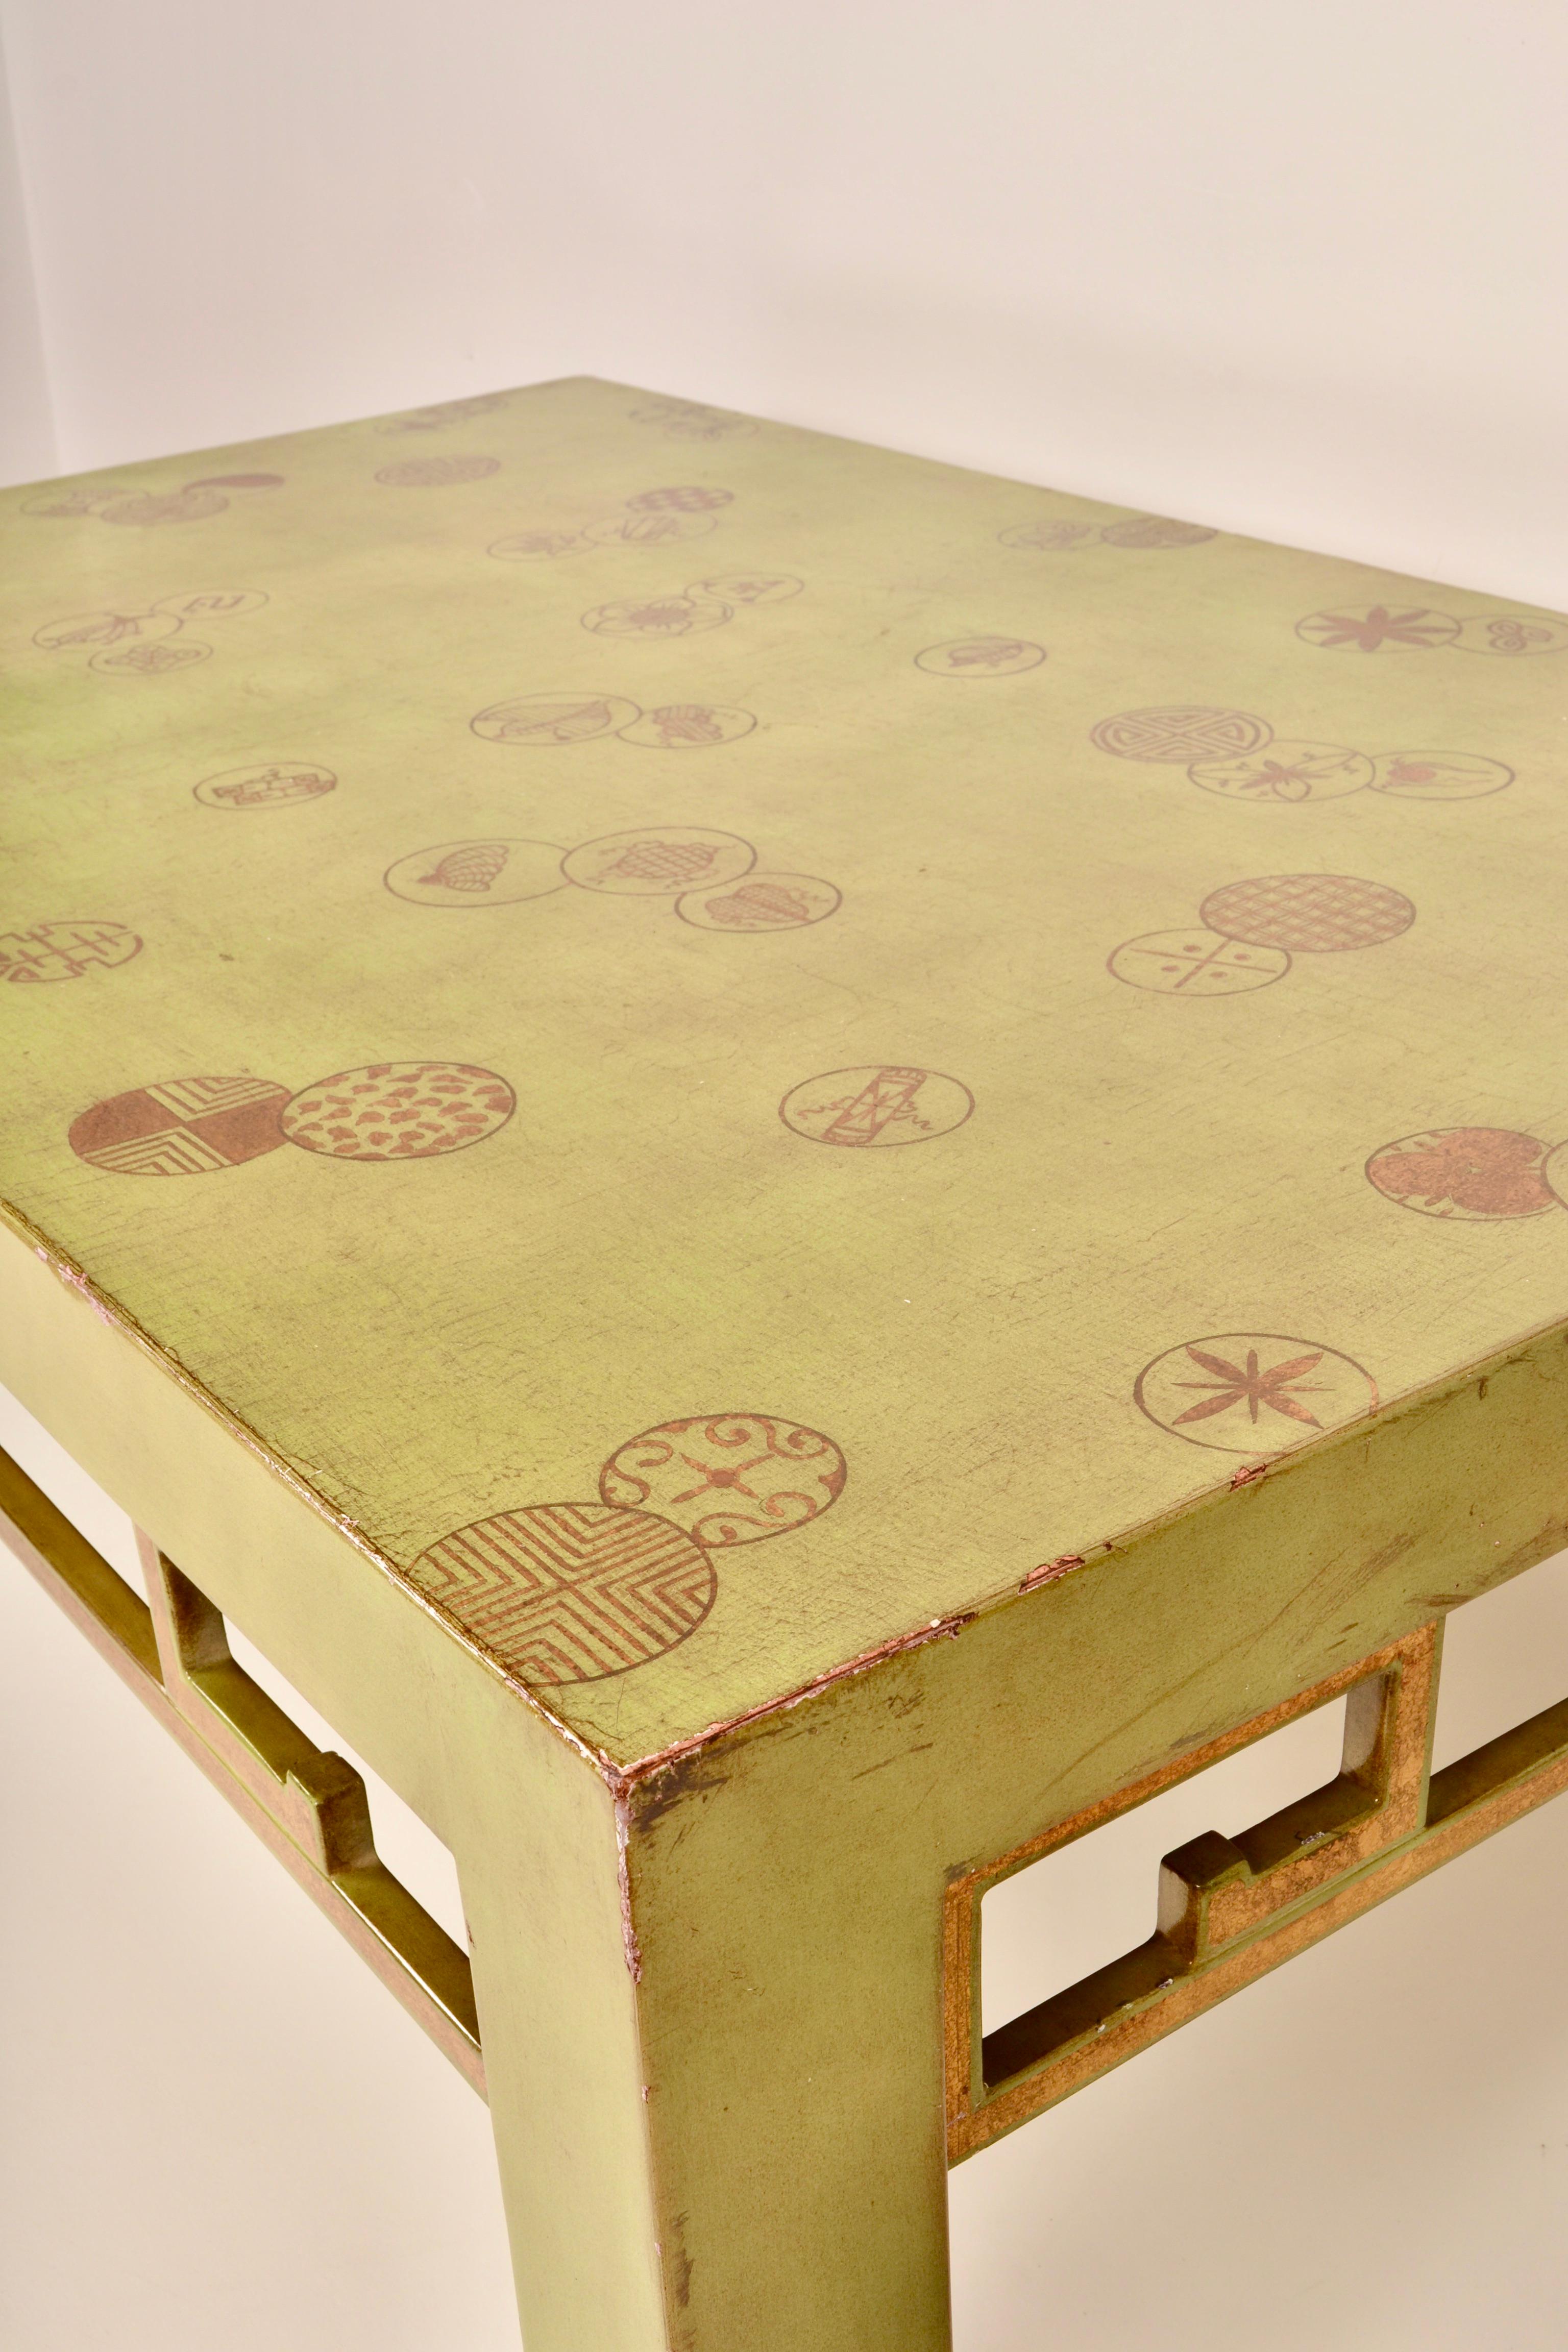 Wonderful color on this lacquered Chinoiserie-form cocktail table. Decorated with quirky, painted gold designs. Gold painted details on decorative stretchers. Great size and in very nice condition.